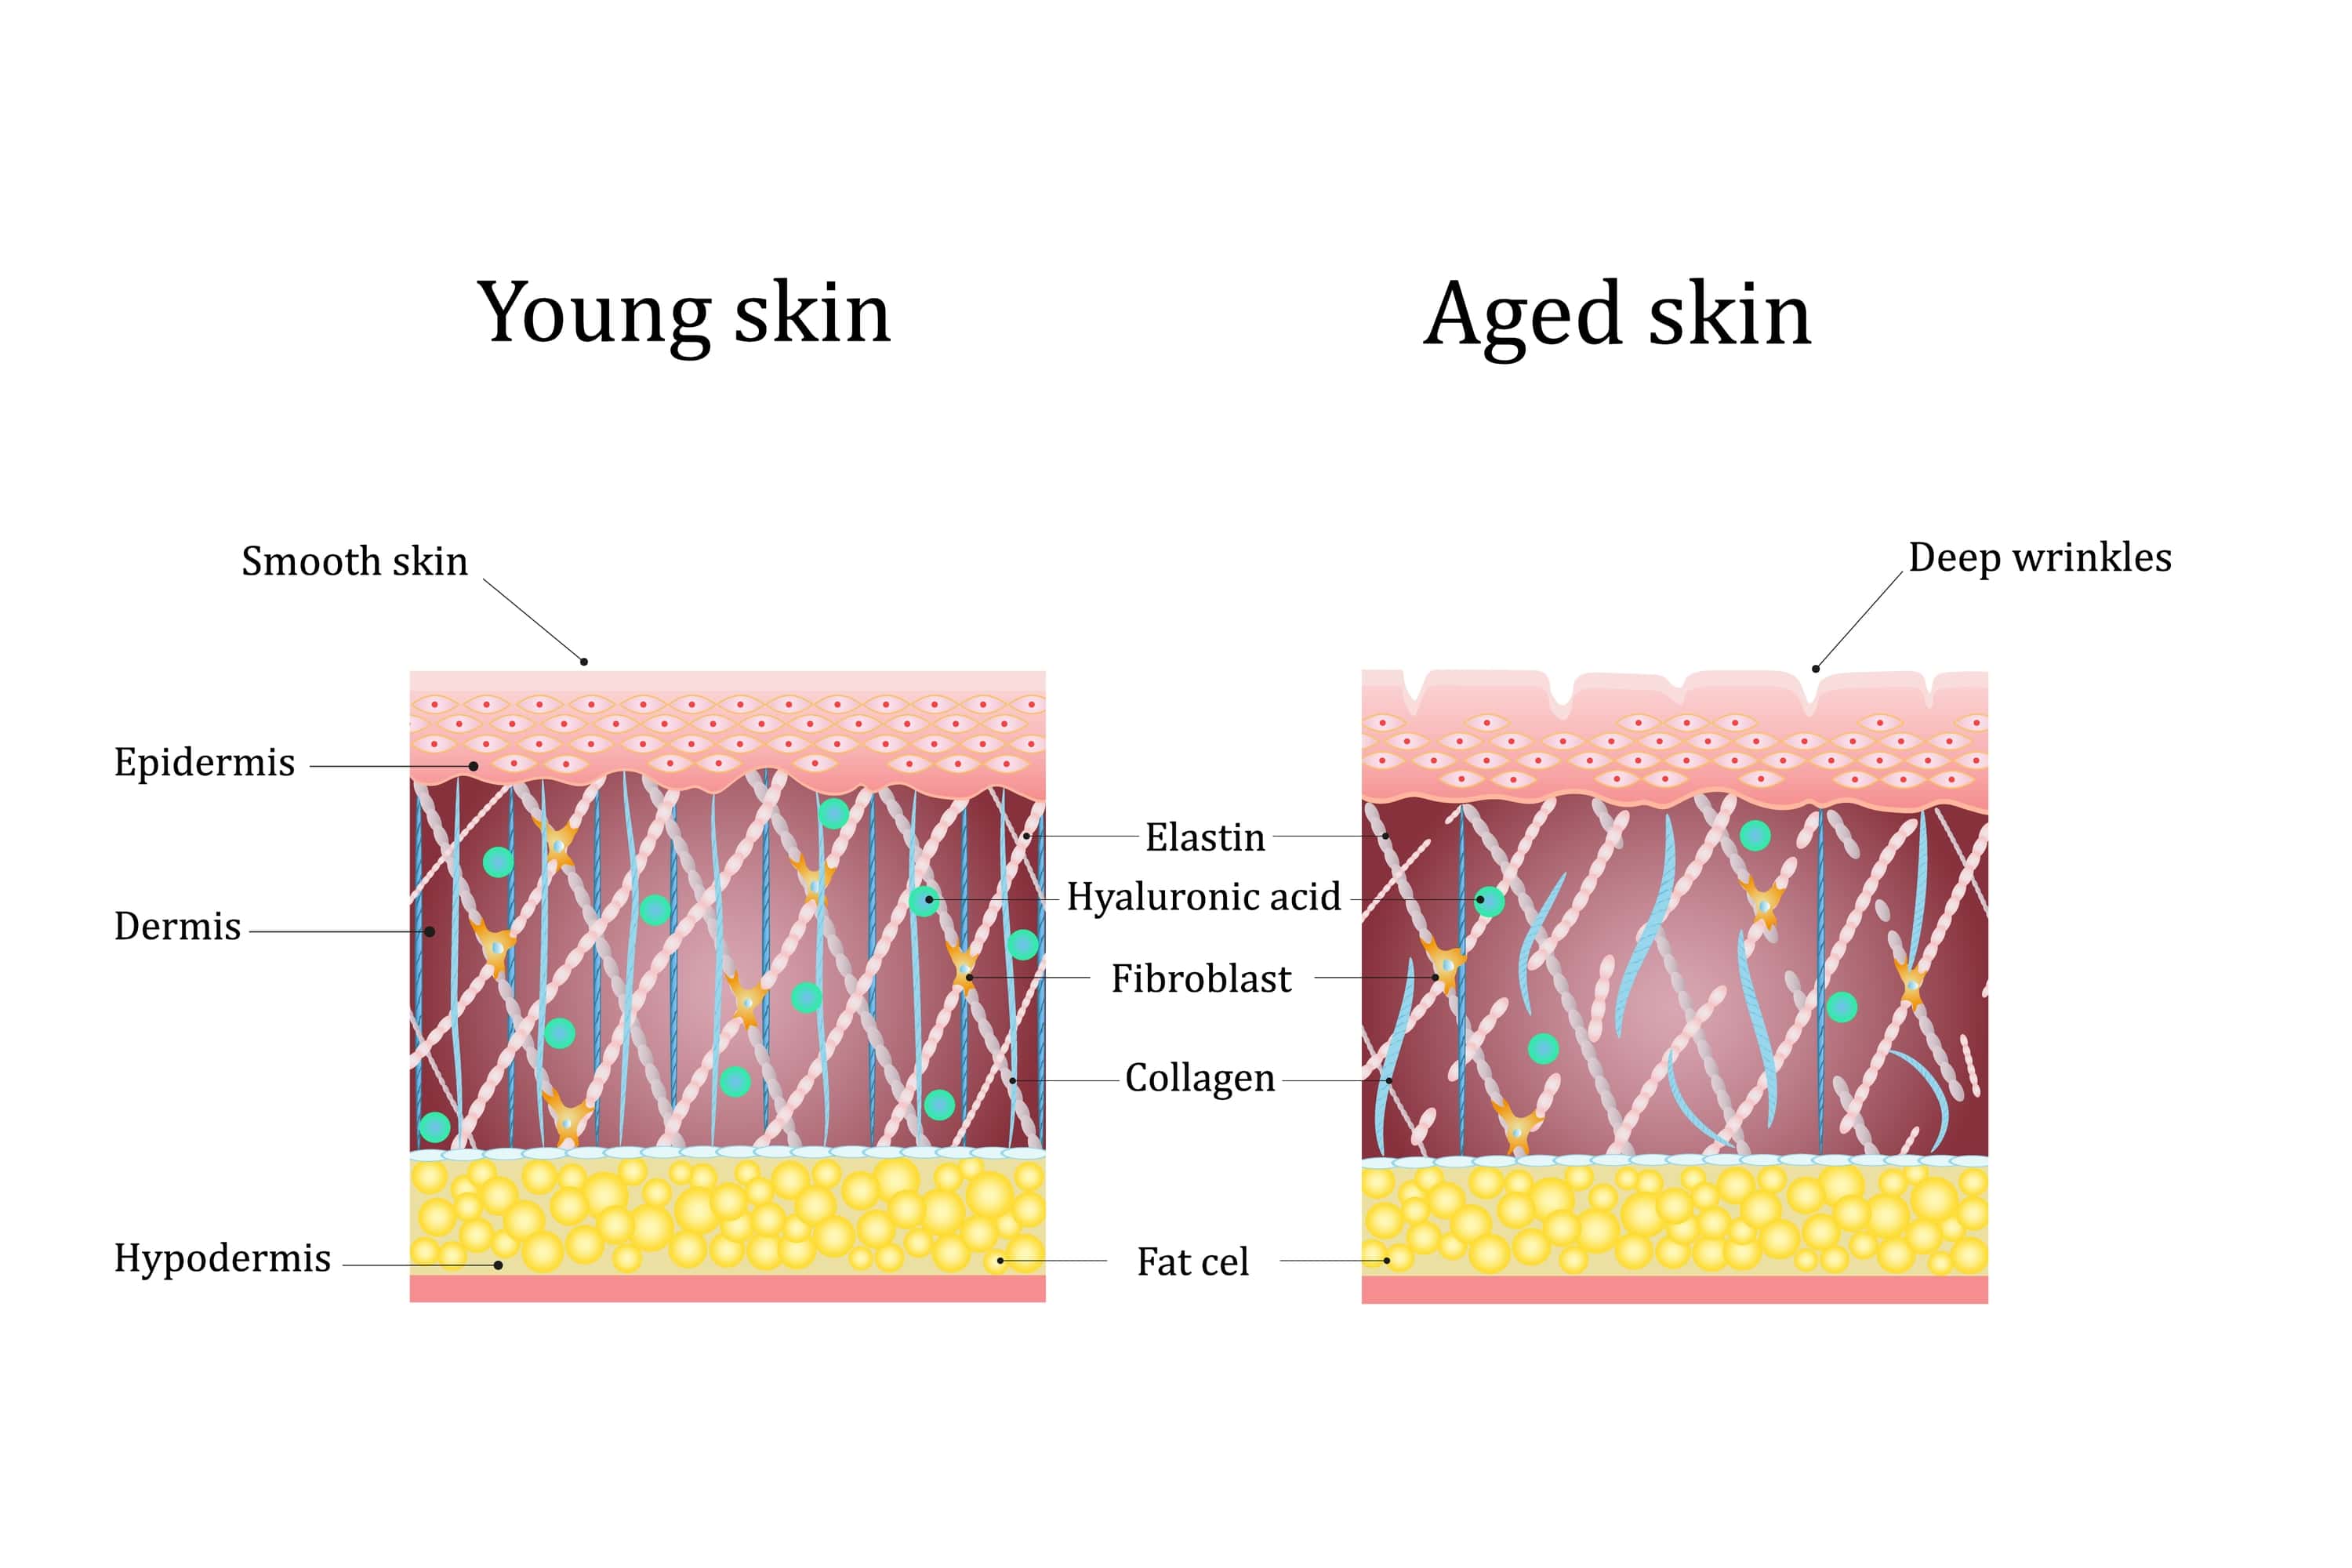 comparison between young skin and aged skin